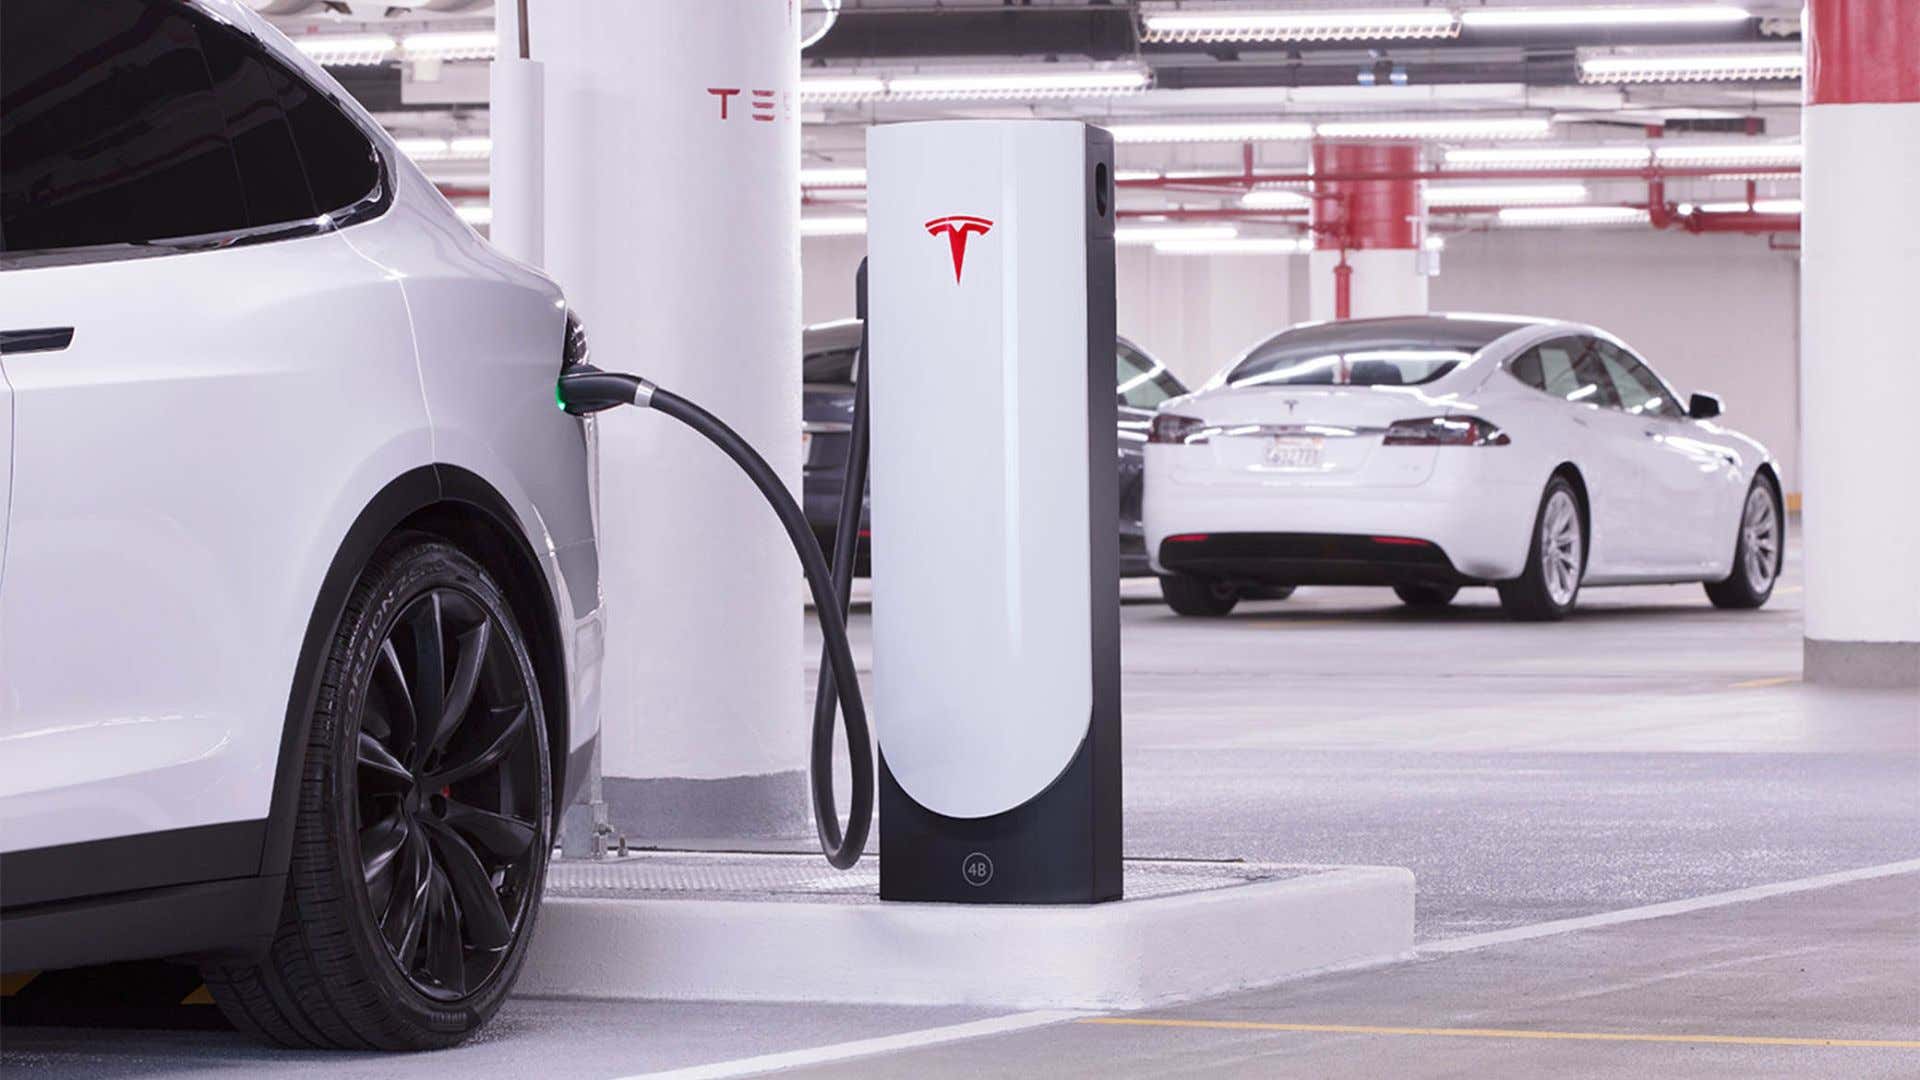 How Long Does a Tesla Charge With Solar Panels?